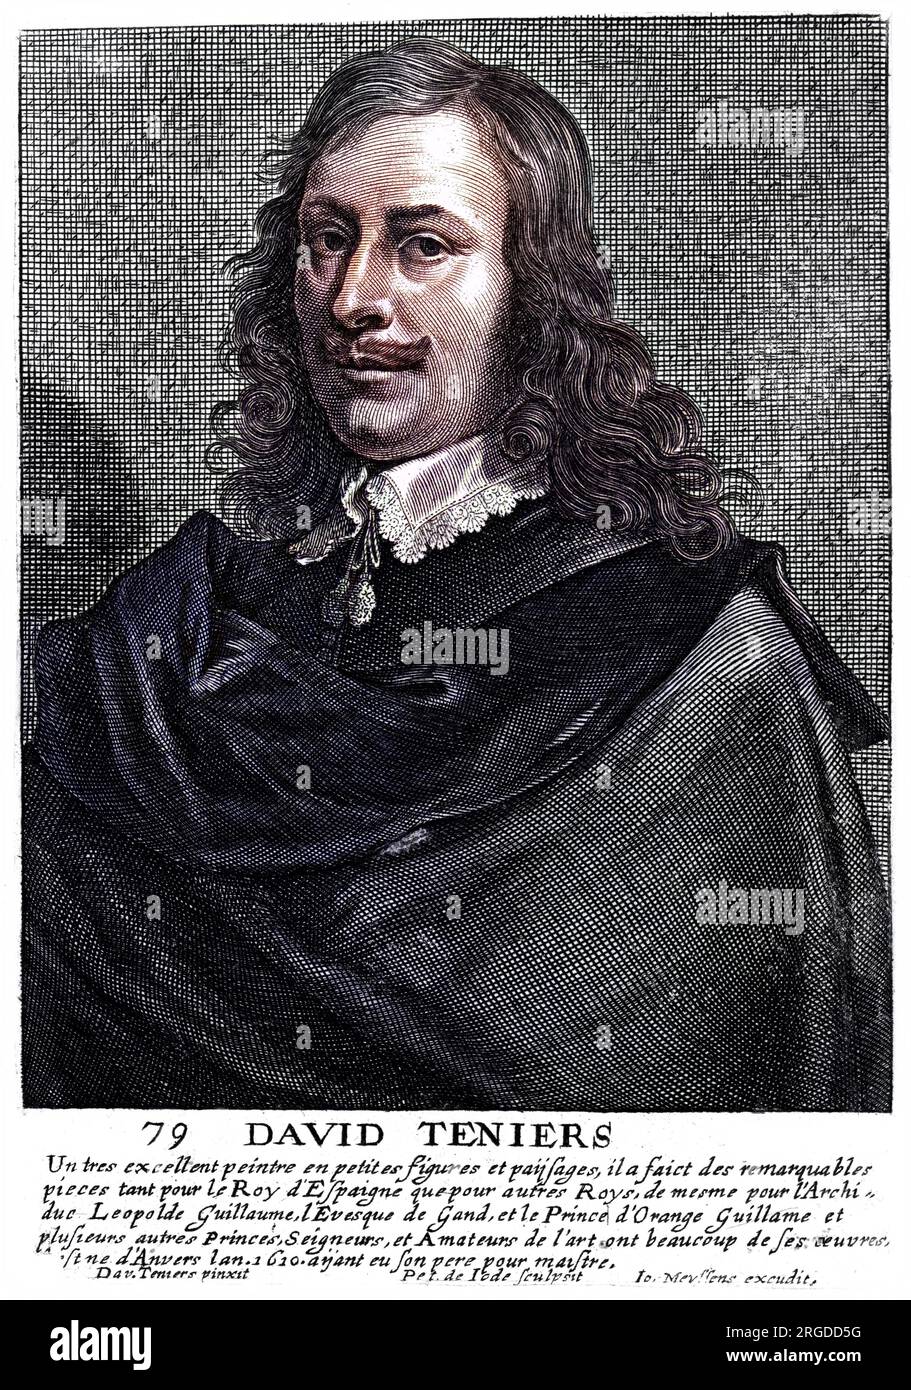 DAVID TENIERS (YOUNGER) Flemish artist from Antwerp famous for his scenes of everyday life Stock Photo